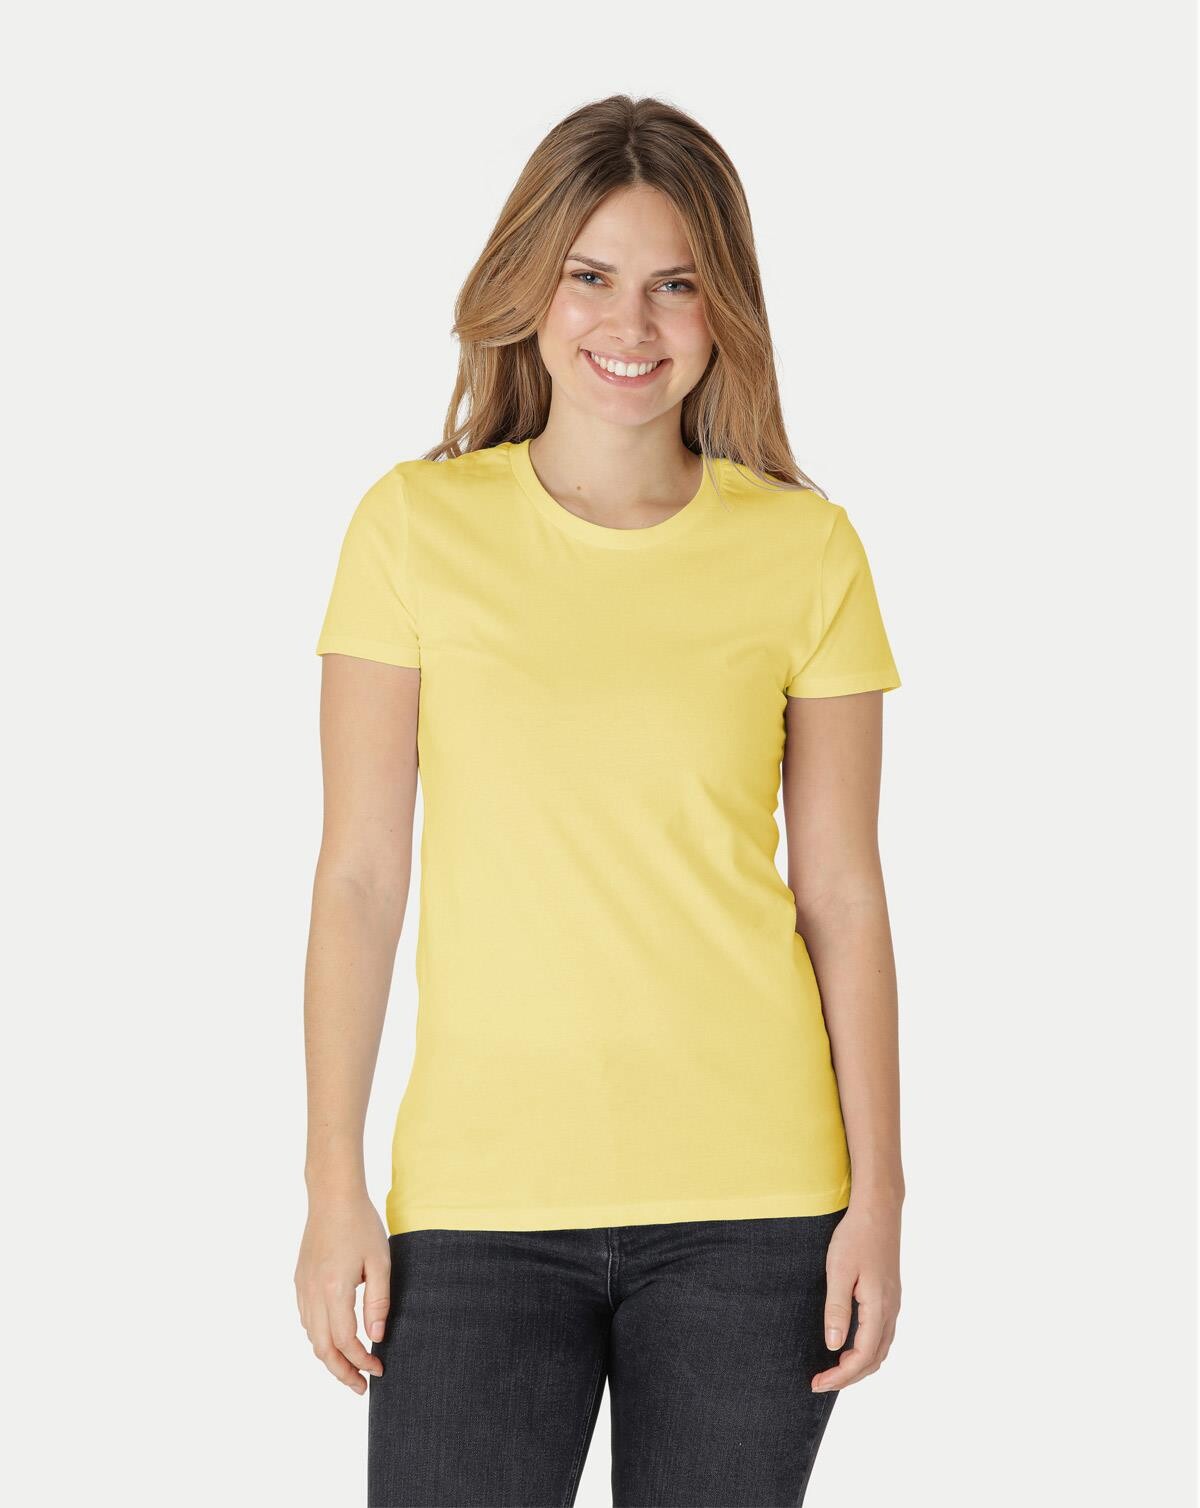 Billede af Neutral Organic - Ladies Fitted T-shirt (Safety Yellow, M)